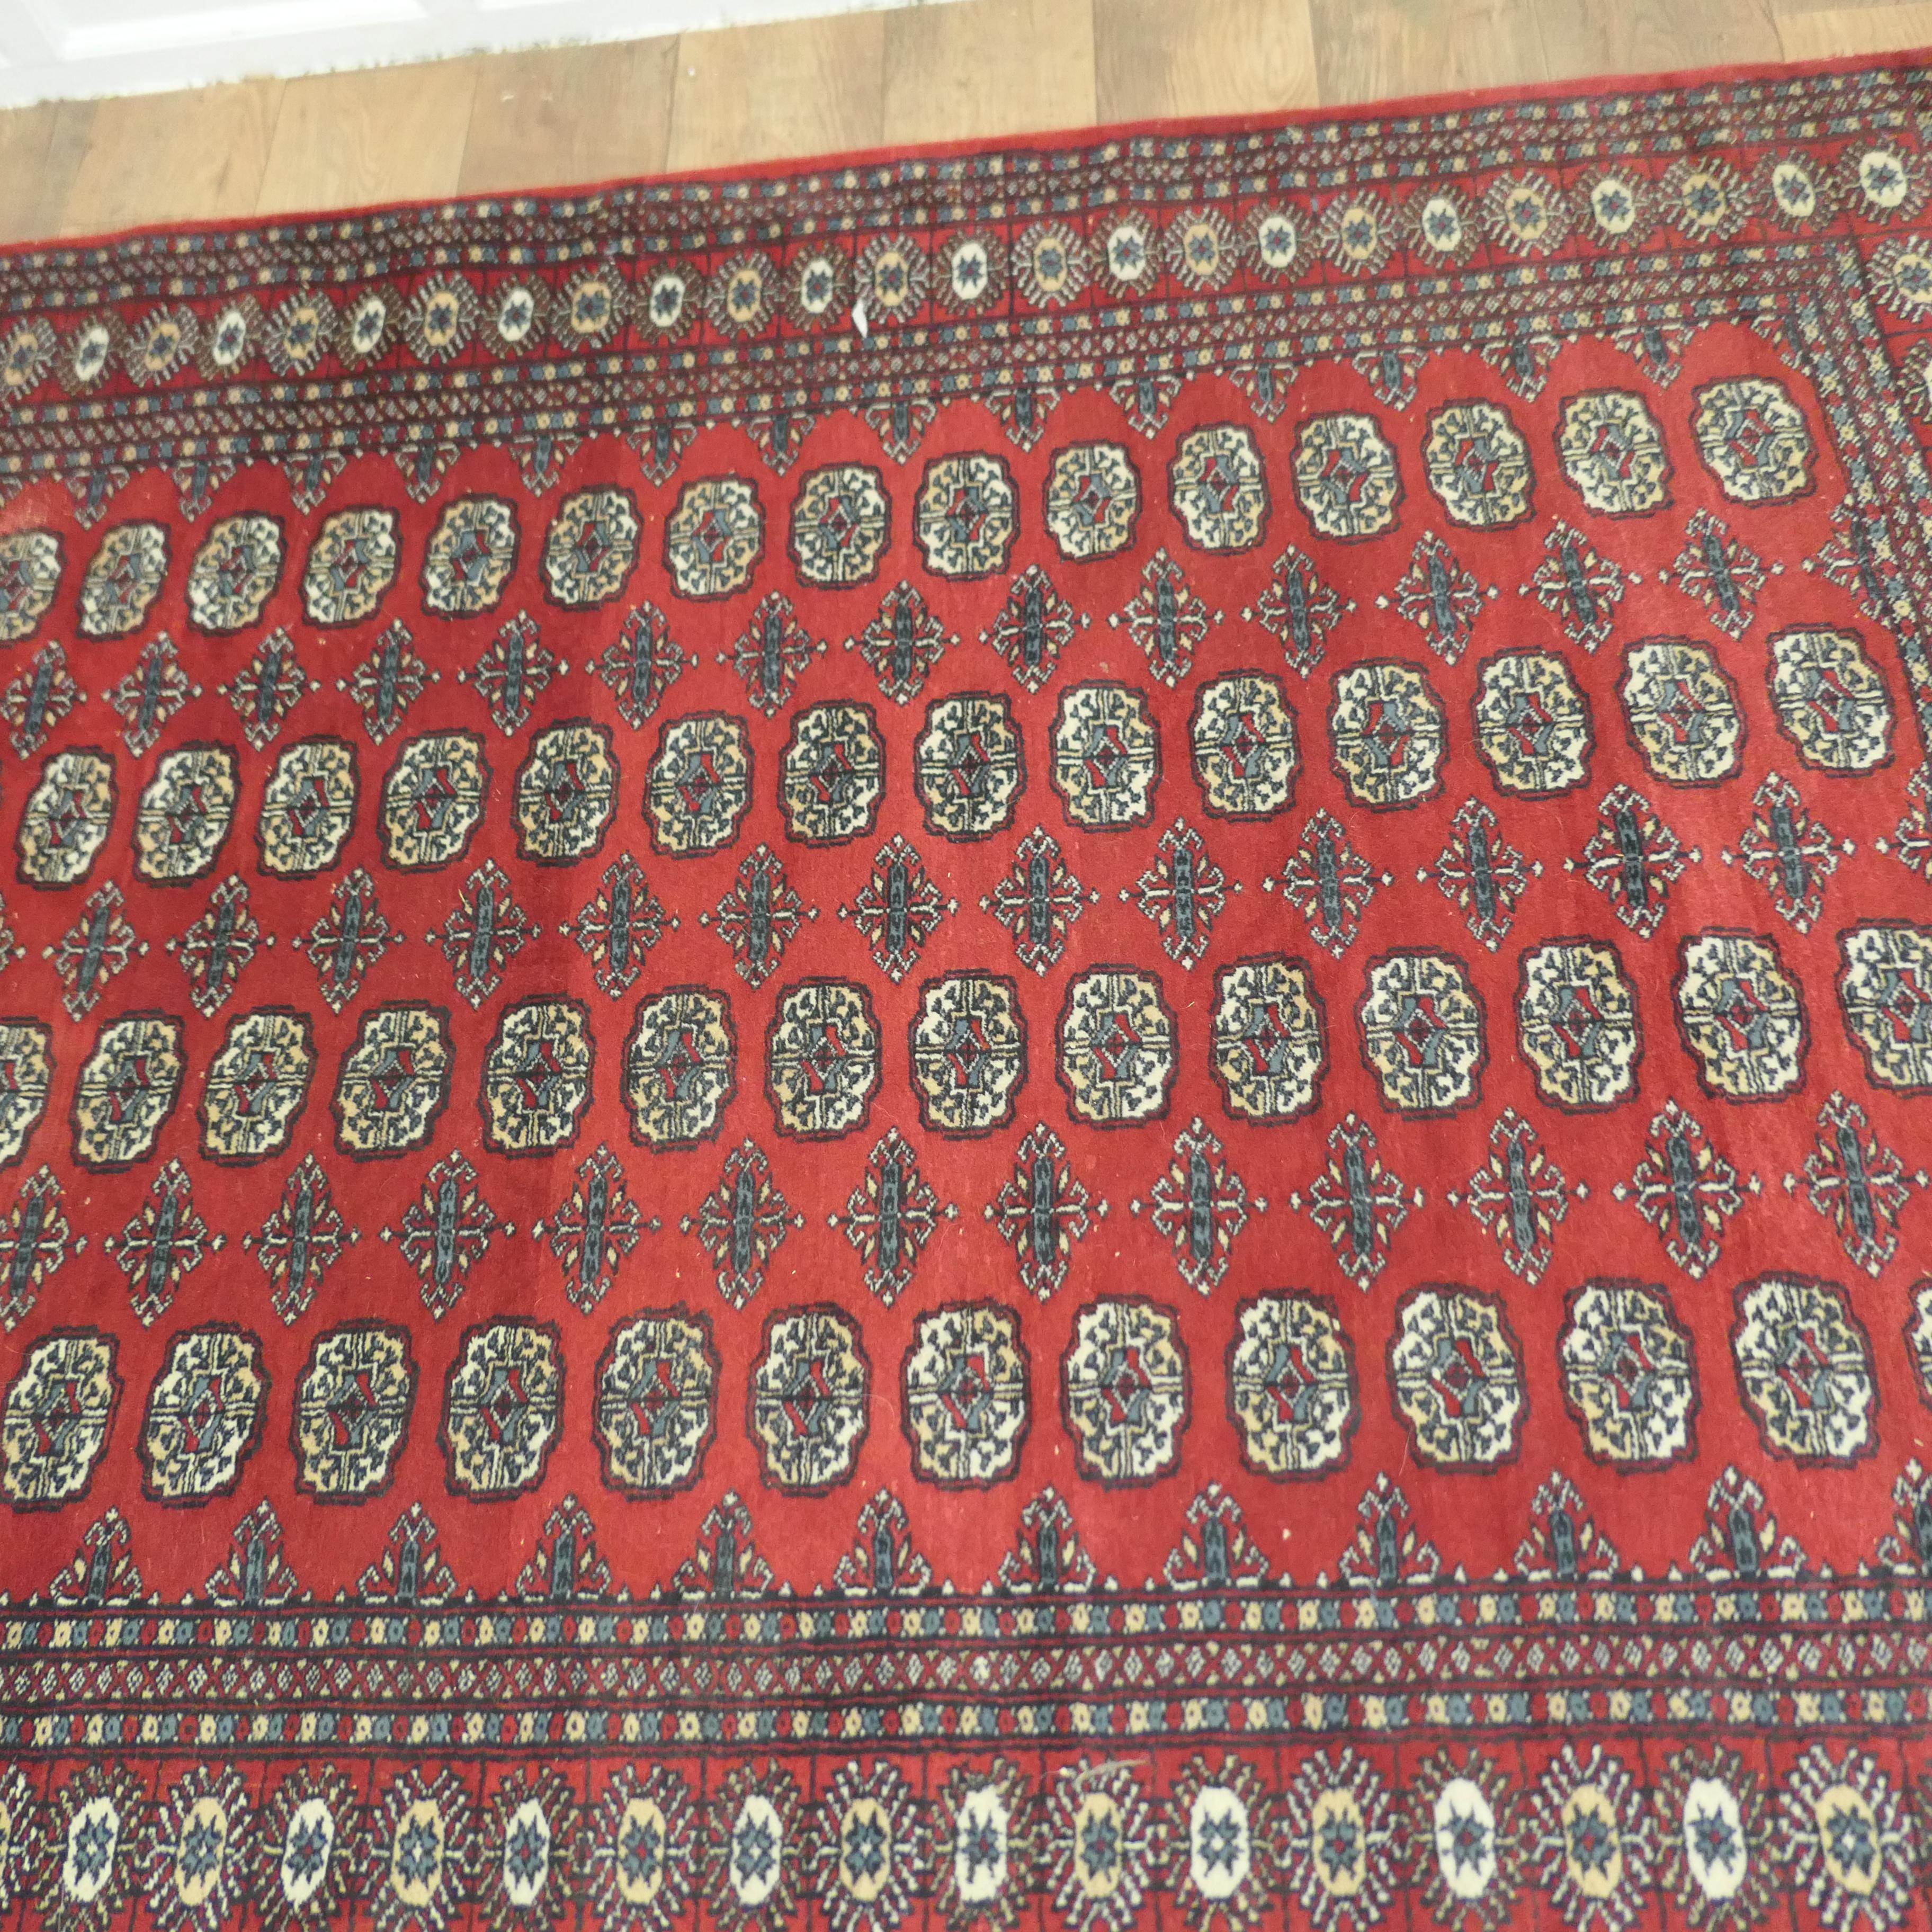 A Lovely Bright Red Wool Rug  The Carpet is a wonderful Bright colour   For Sale 6